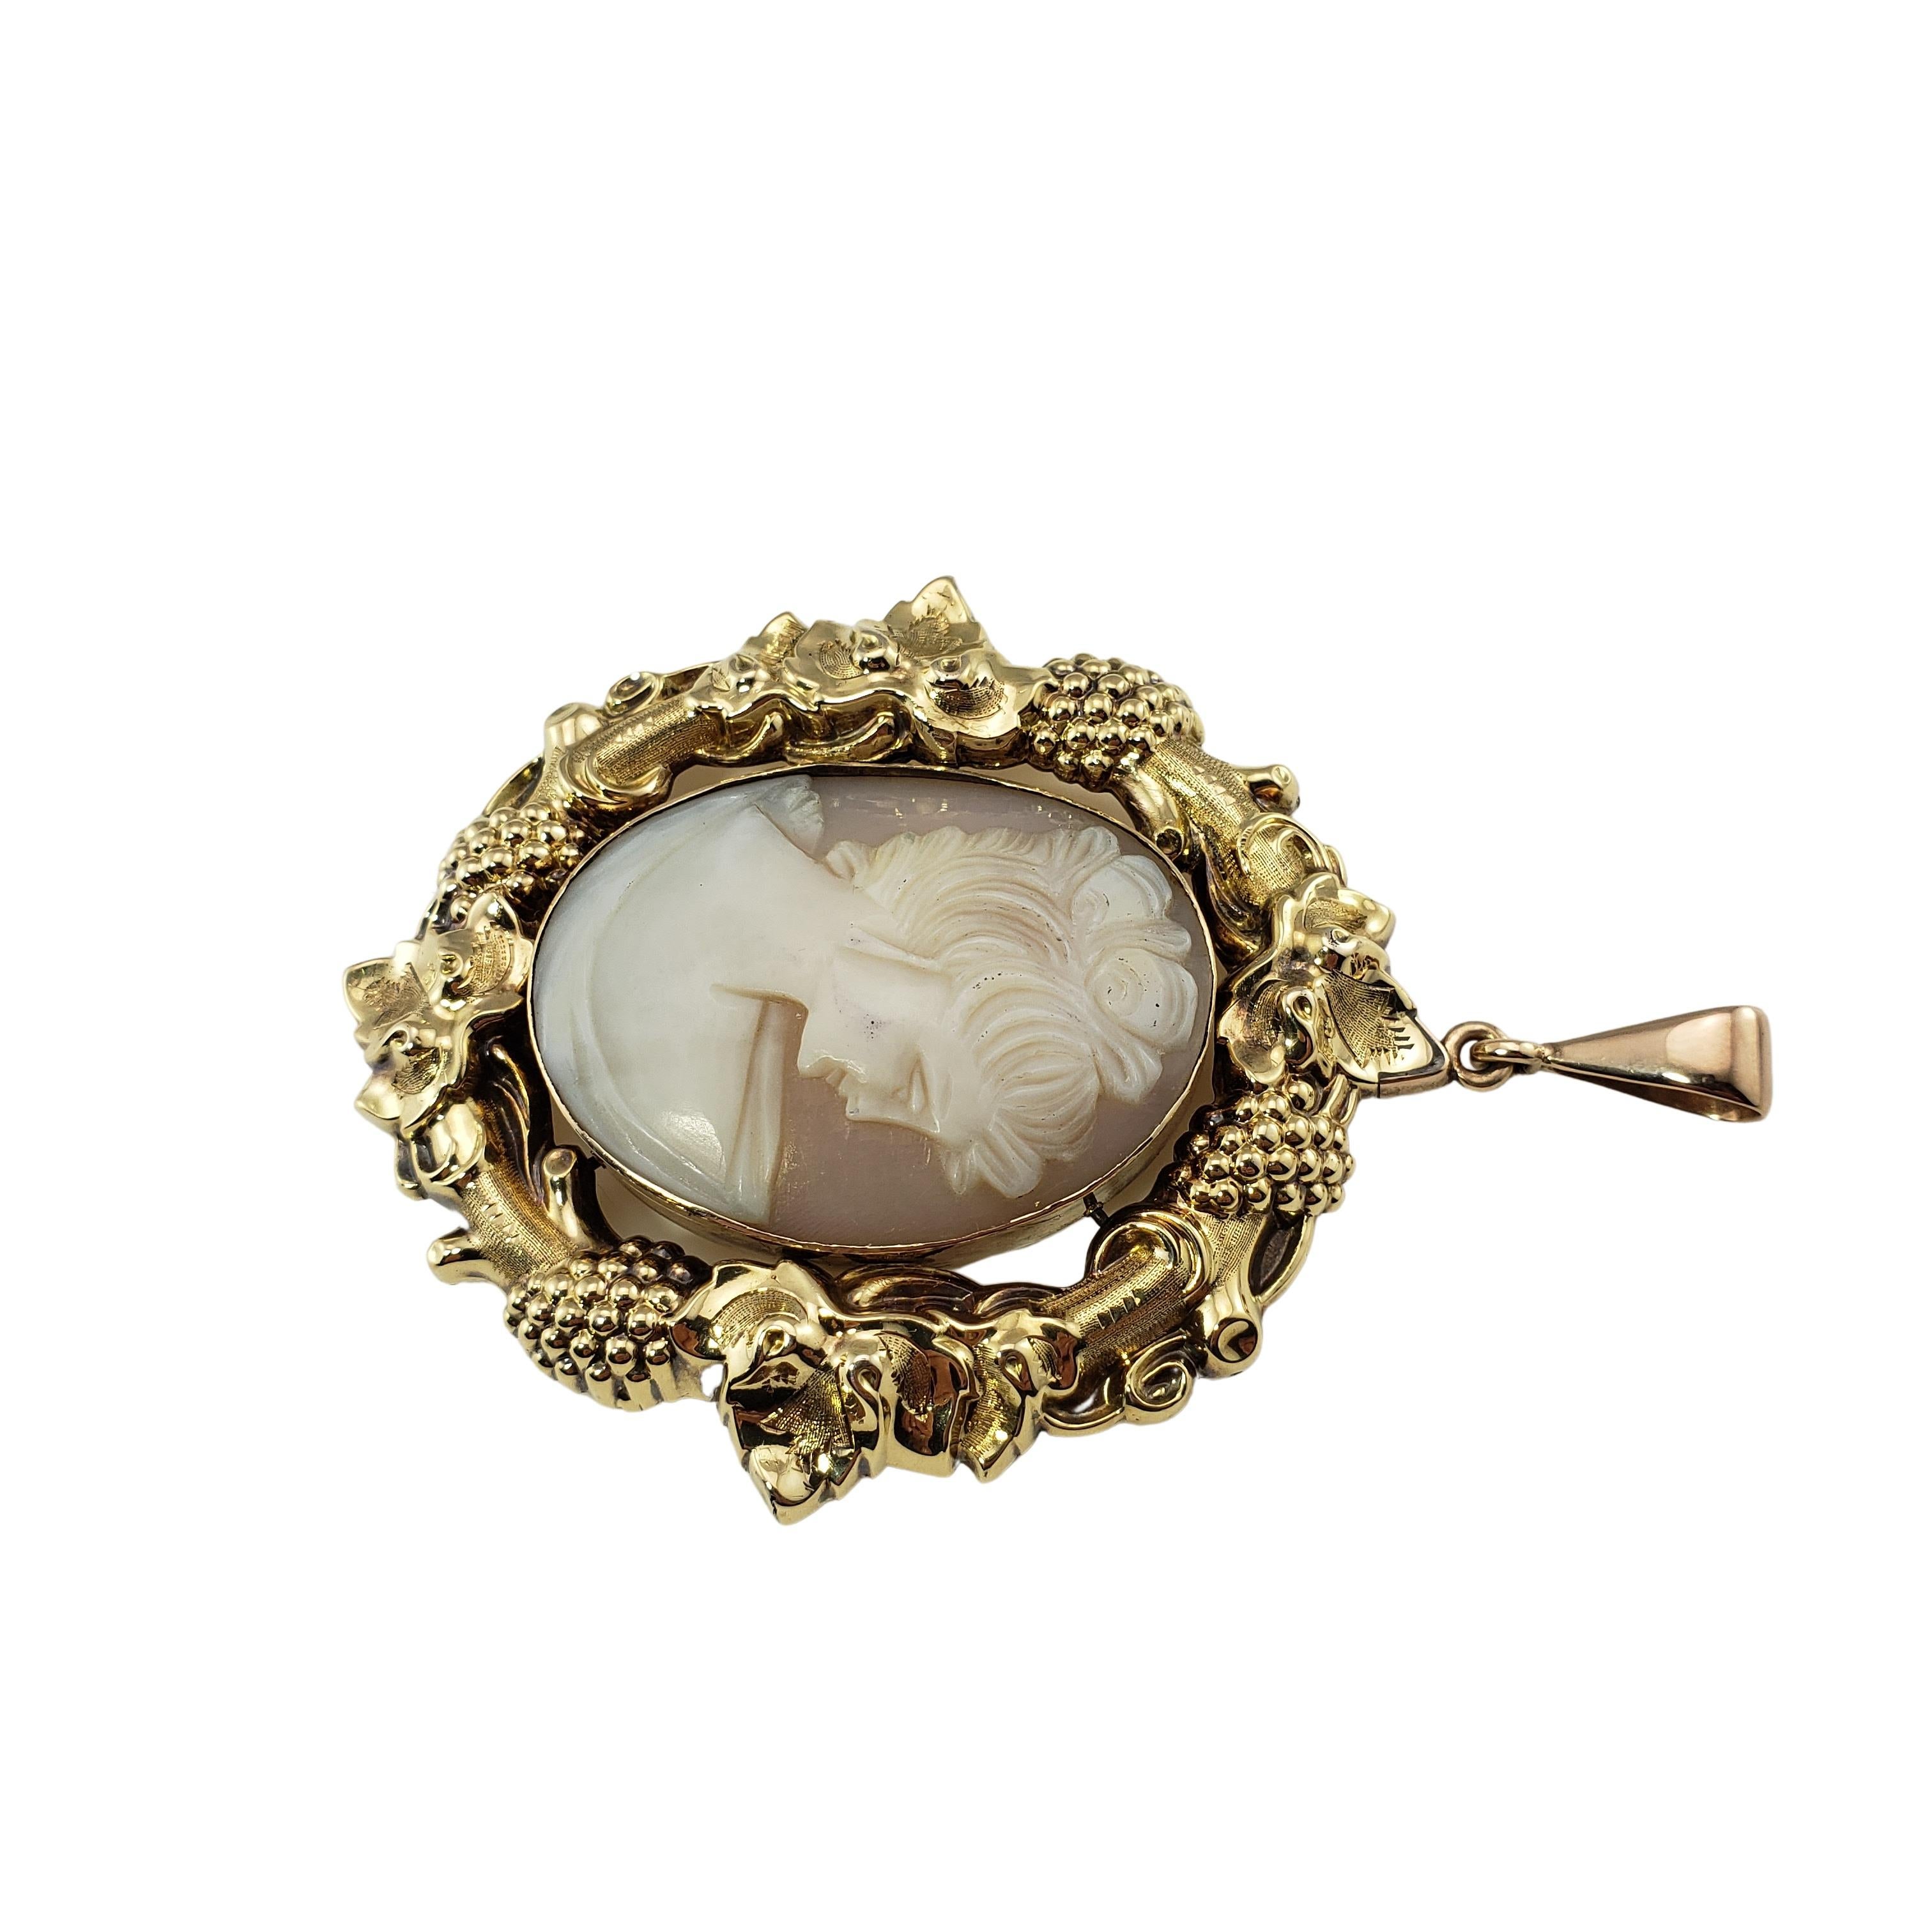 Vintage 14 Karat Yellow Gold Cameo Pendant-

This elegant cameo pendant features a lovely lady in profile set in beautifully detailed 14K yellow gold.

Size:  62 mm x 52 mm

Weight:  11.5 dwt. /  18.0 gr.

Tested for 14K gold.

Very good condition,